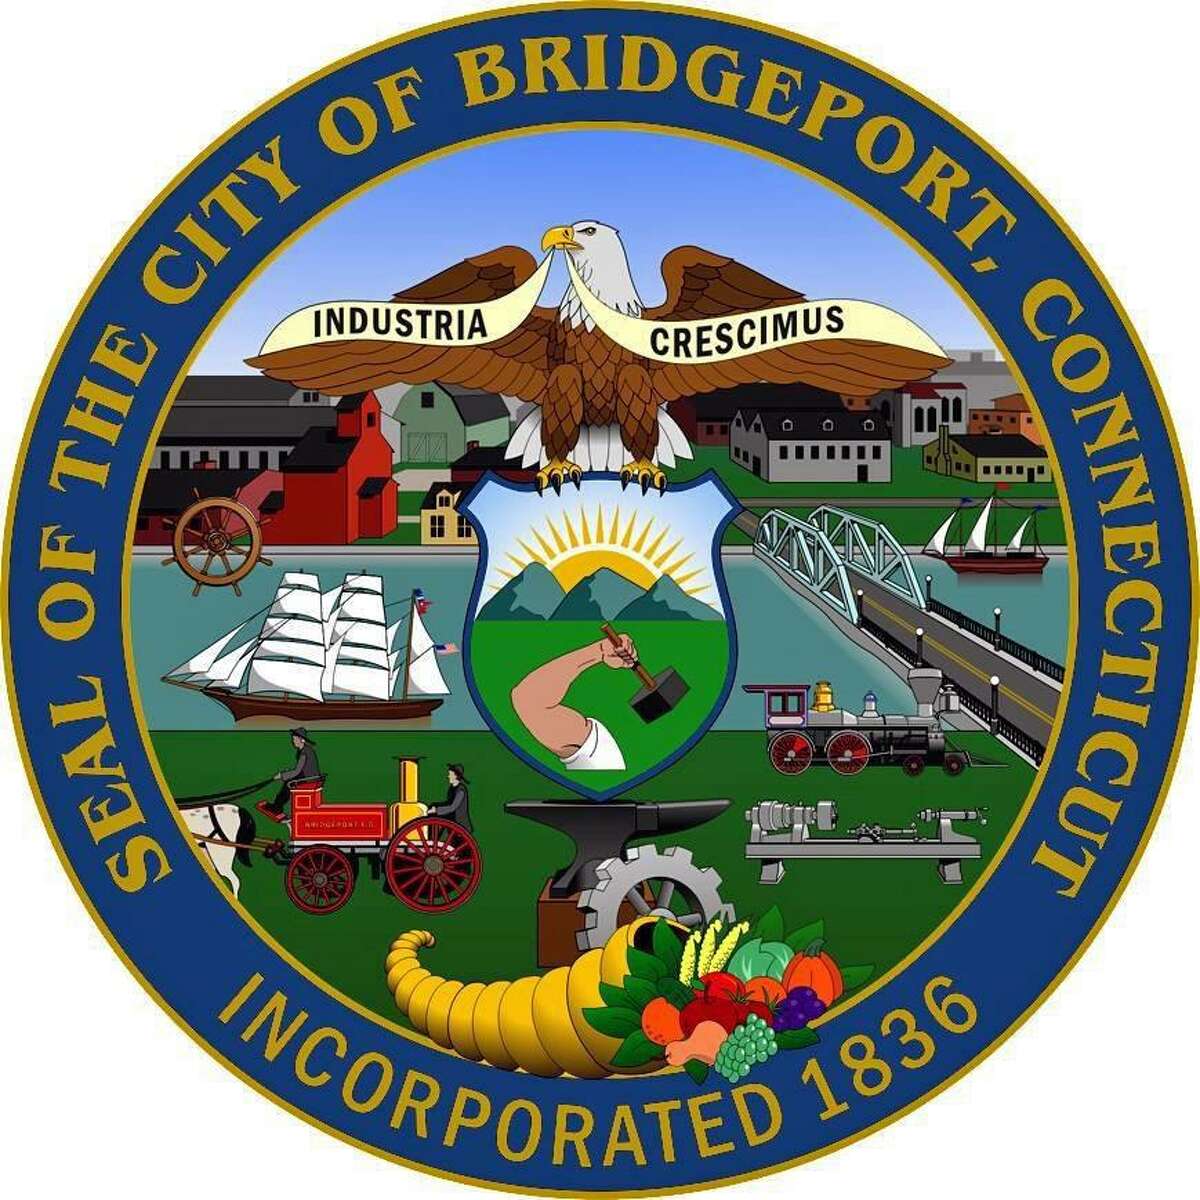 File photo of the Bridgeport, Conn., seal.